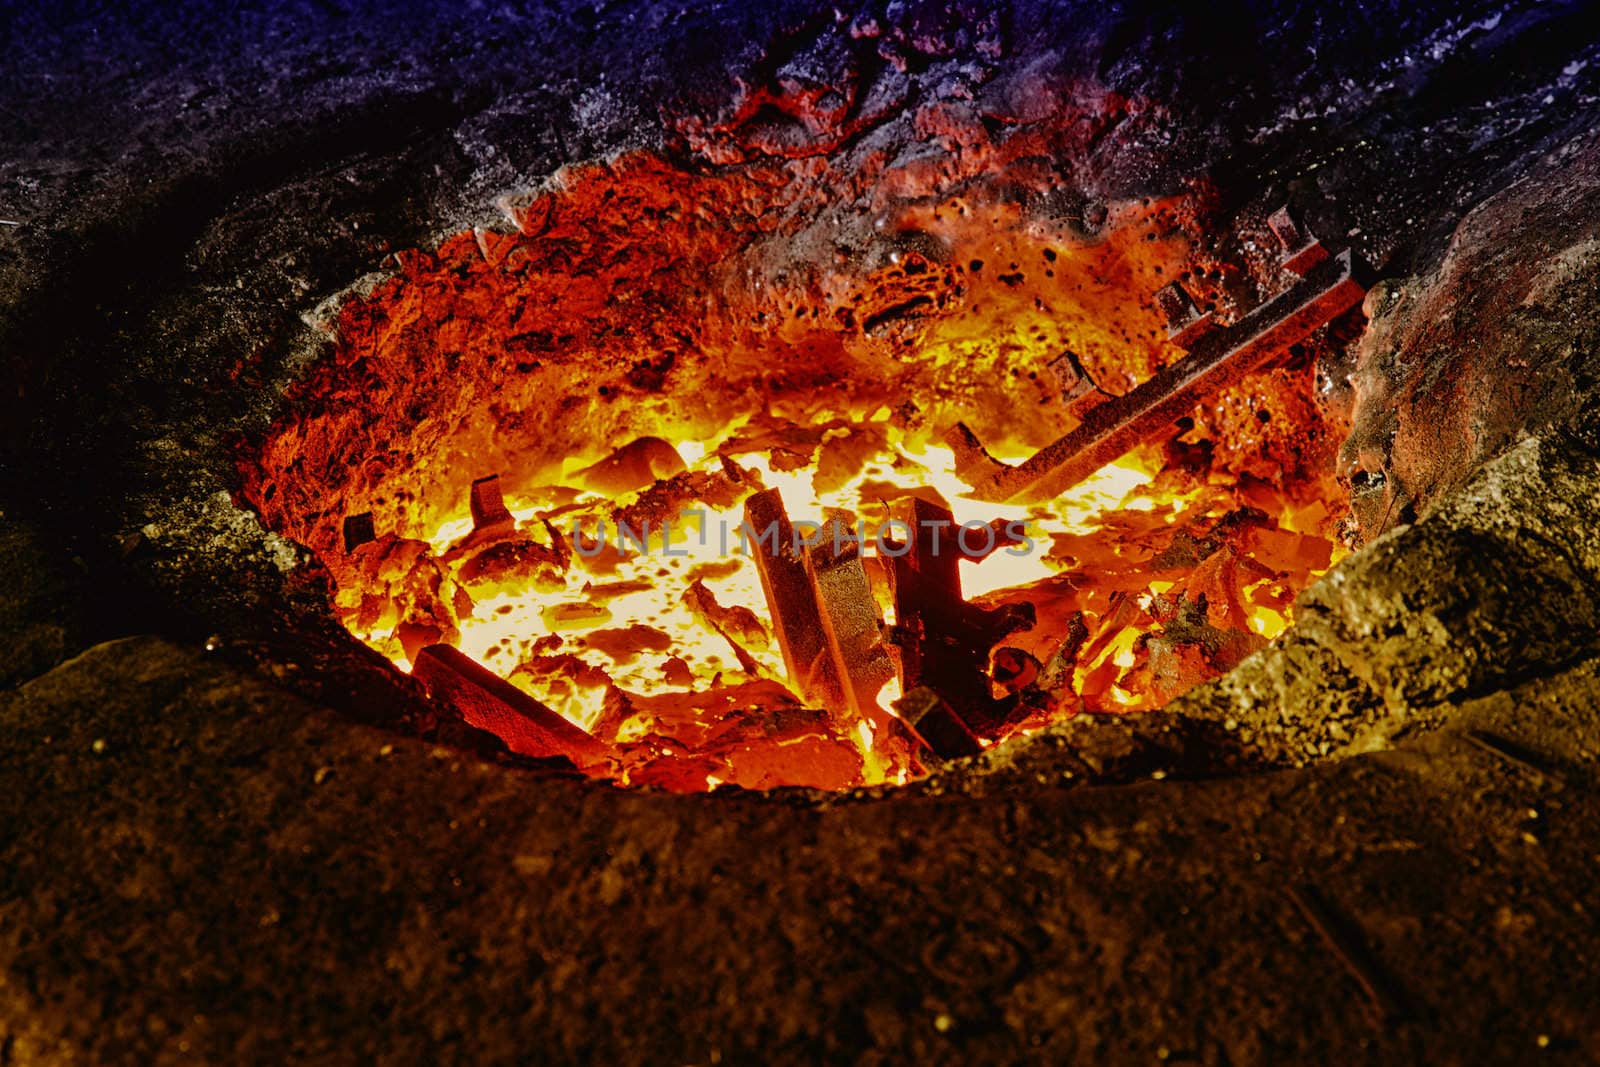 Melting iron pieces in a furnace hole